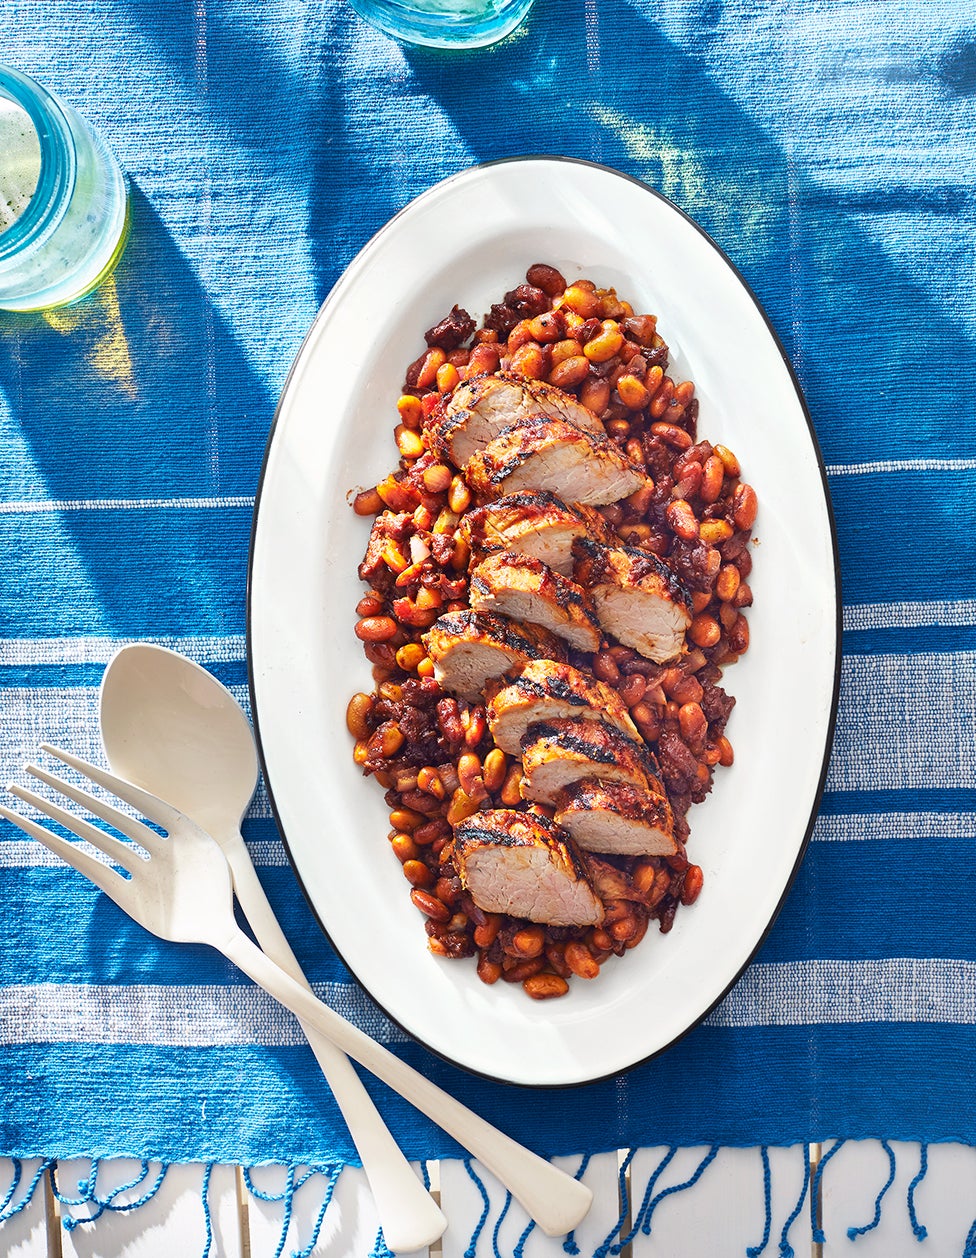 This Recipe For Pork And Beans With Coca-Cola BBQ Sauce Will Be Your New Favorite
